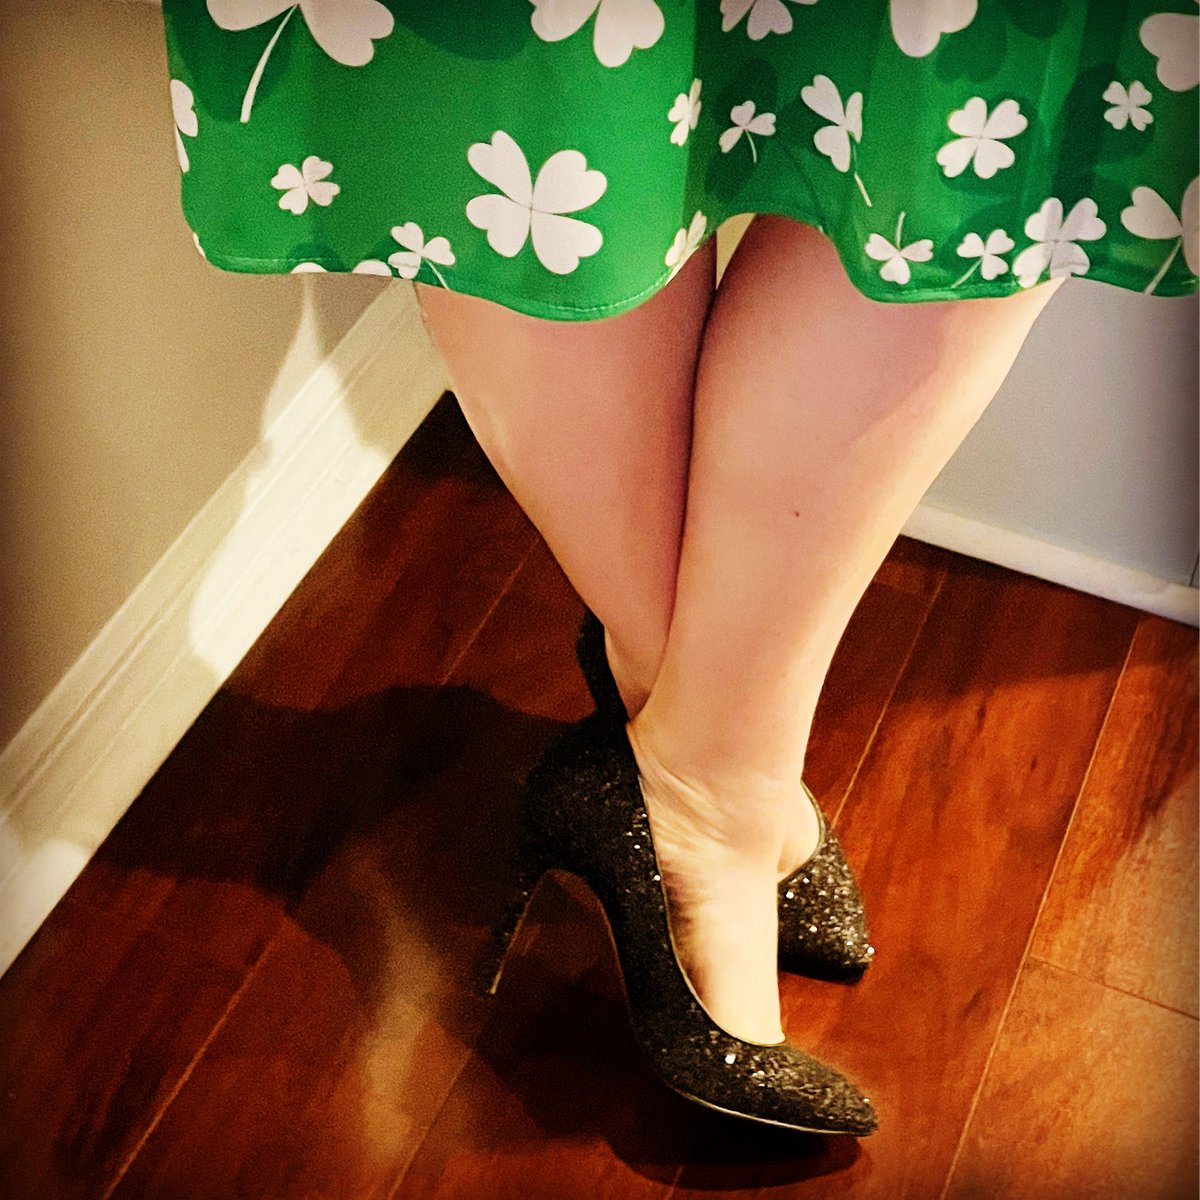 Always love pulling out the official #stpatricksday @amazonfashion dress for the holiday! Decided to pair it with the #sparkly @jessicasimpsonstyle #highheels this time. #happystpatricksday #luckylady #irishblessing #shoelove365 #shoes #shoelove #shoelover #heellove #heellover